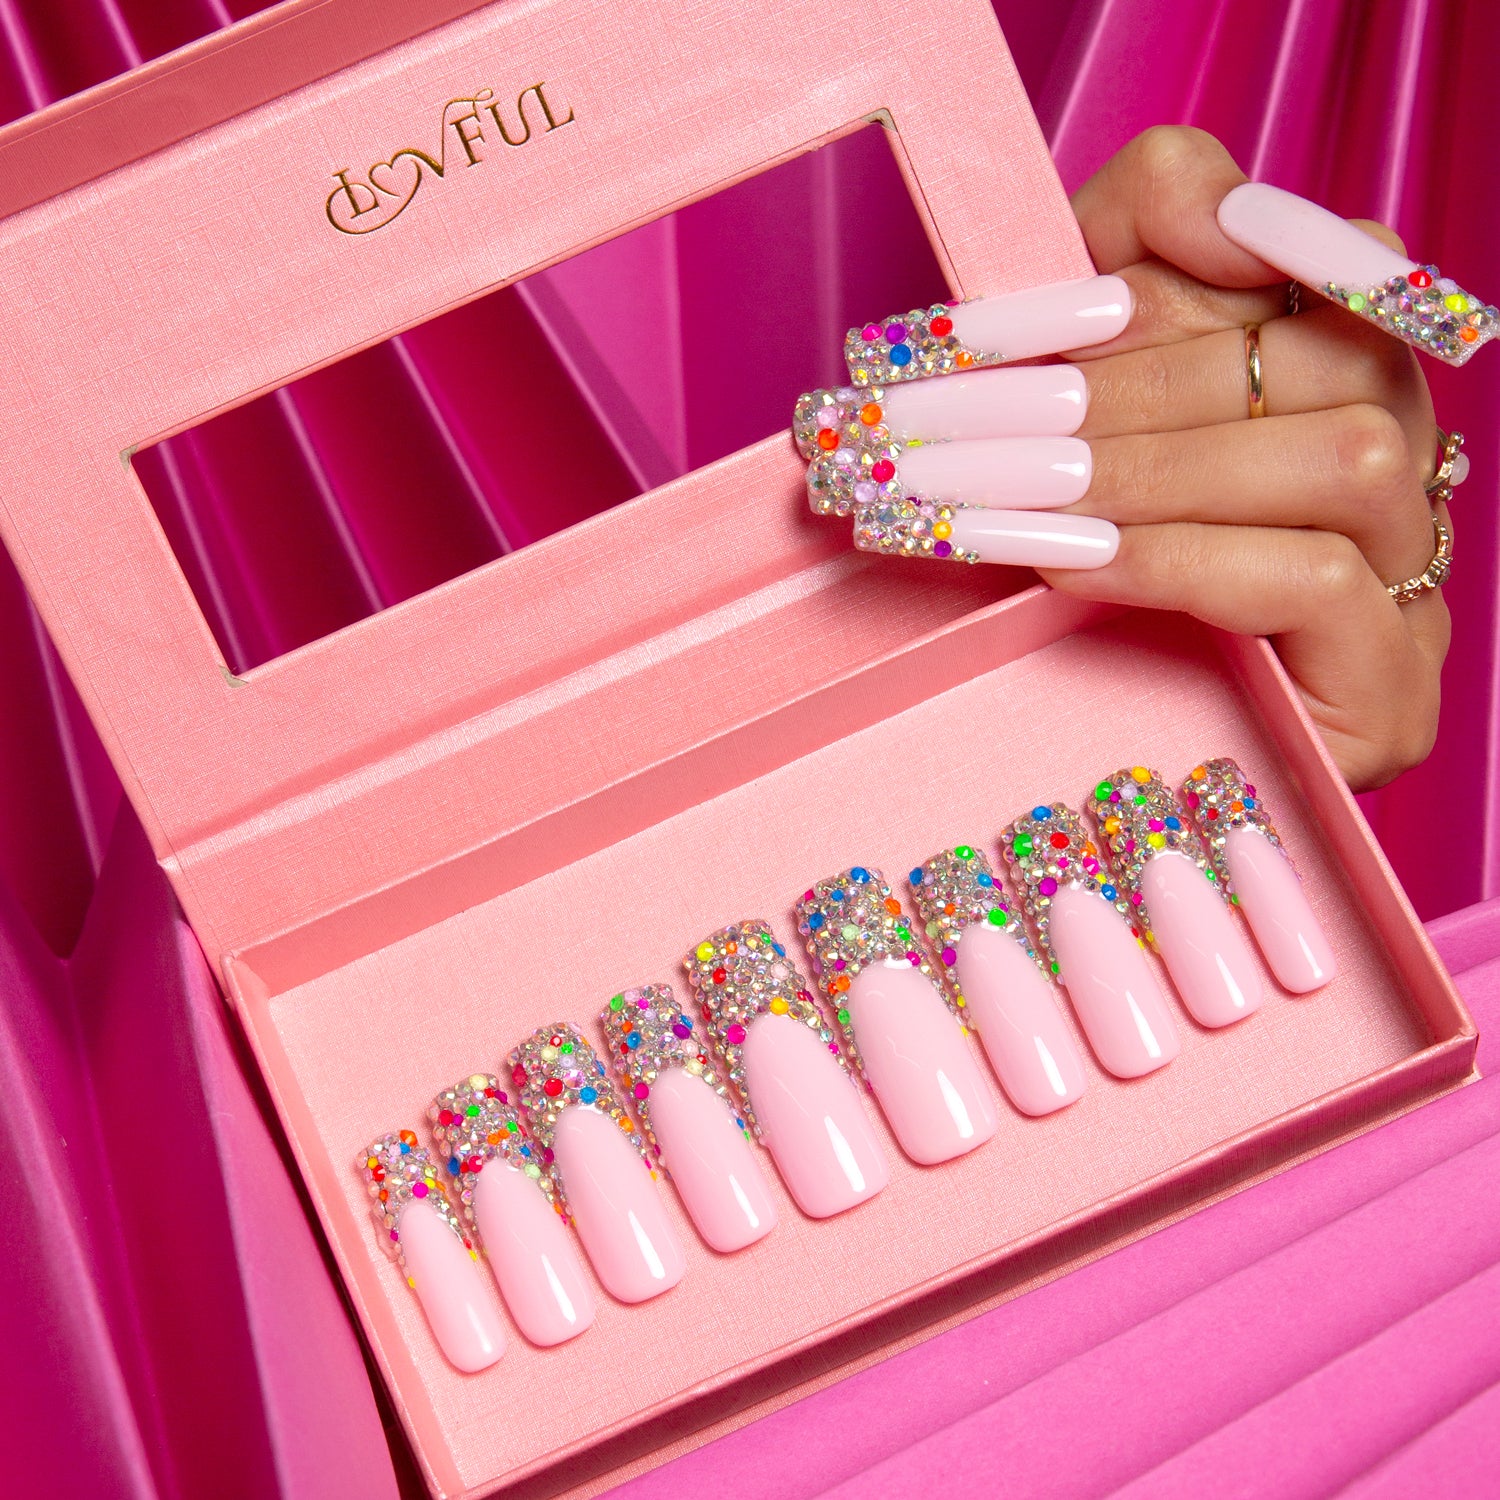 Lovful 'Jelly Bean' press-on nails featuring a nude base with colorful sugary beans on the tips, displayed in a pink box, with a hand holding one nail showcasing its design.